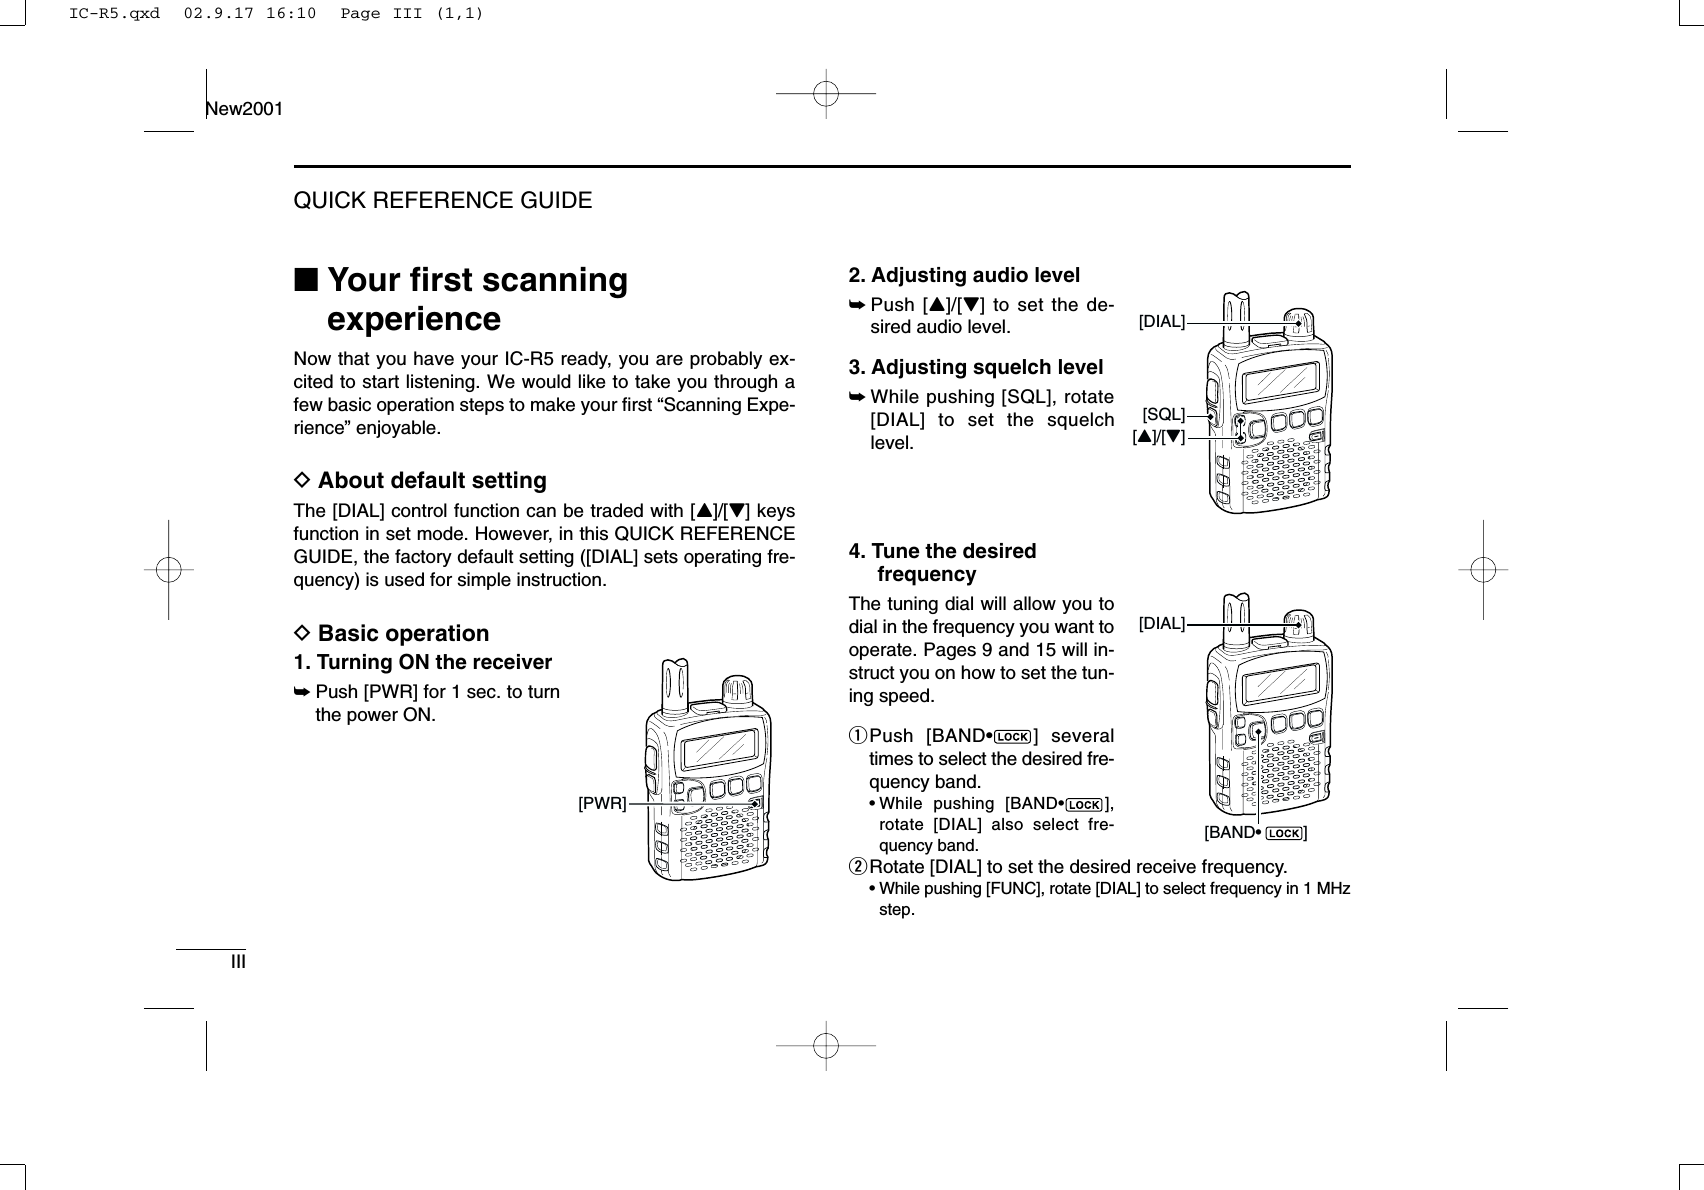 IIIQUICK REFERENCE GUIDENew2001■Your ﬁrst scanningexperienceNow that you have your IC-R5 ready, you are probably ex-cited to start listening. We would like to take you through afew basic operation steps to make your ﬁrst “Scanning Expe-rience” enjoyable. DAbout default settingThe [DIAL] control function can be traded with [Y]/[Z] keysfunction in set mode. However, in this QUICK REFERENCEGUIDE, the factory default setting ([DIAL] sets operating fre-quency) is used for simple instruction.DBasic operation1. Turning ON the receiver➥Push [PWR] for 1 sec. to turnthe power ON.2. Adjusting audio level➥Push [Y]/[Z] to set the de-sired audio level.3. Adjusting squelch level➥While pushing [SQL], rotate[DIAL] to set the squelchlevel.4. Tune the desiredfrequencyThe tuning dial will allow you todial in the frequency you want tooperate. Pages 9 and 15 will in-struct you on how to set the tun-ing speed.qPush [BAND•] severaltimes to select the desired fre-quency band.•While pushing [BAND•],rotate [DIAL] also select fre-quency band.wRotate [DIAL] to set the desired receive frequency.•While pushing [FUNC], rotate [DIAL] to select frequency in 1 MHzstep.[DIAL][BAND•         ][SQL][Y]/[Z][DIAL][PWR]IC-R5.qxd  02.9.17 16:10  Page III (1,1)